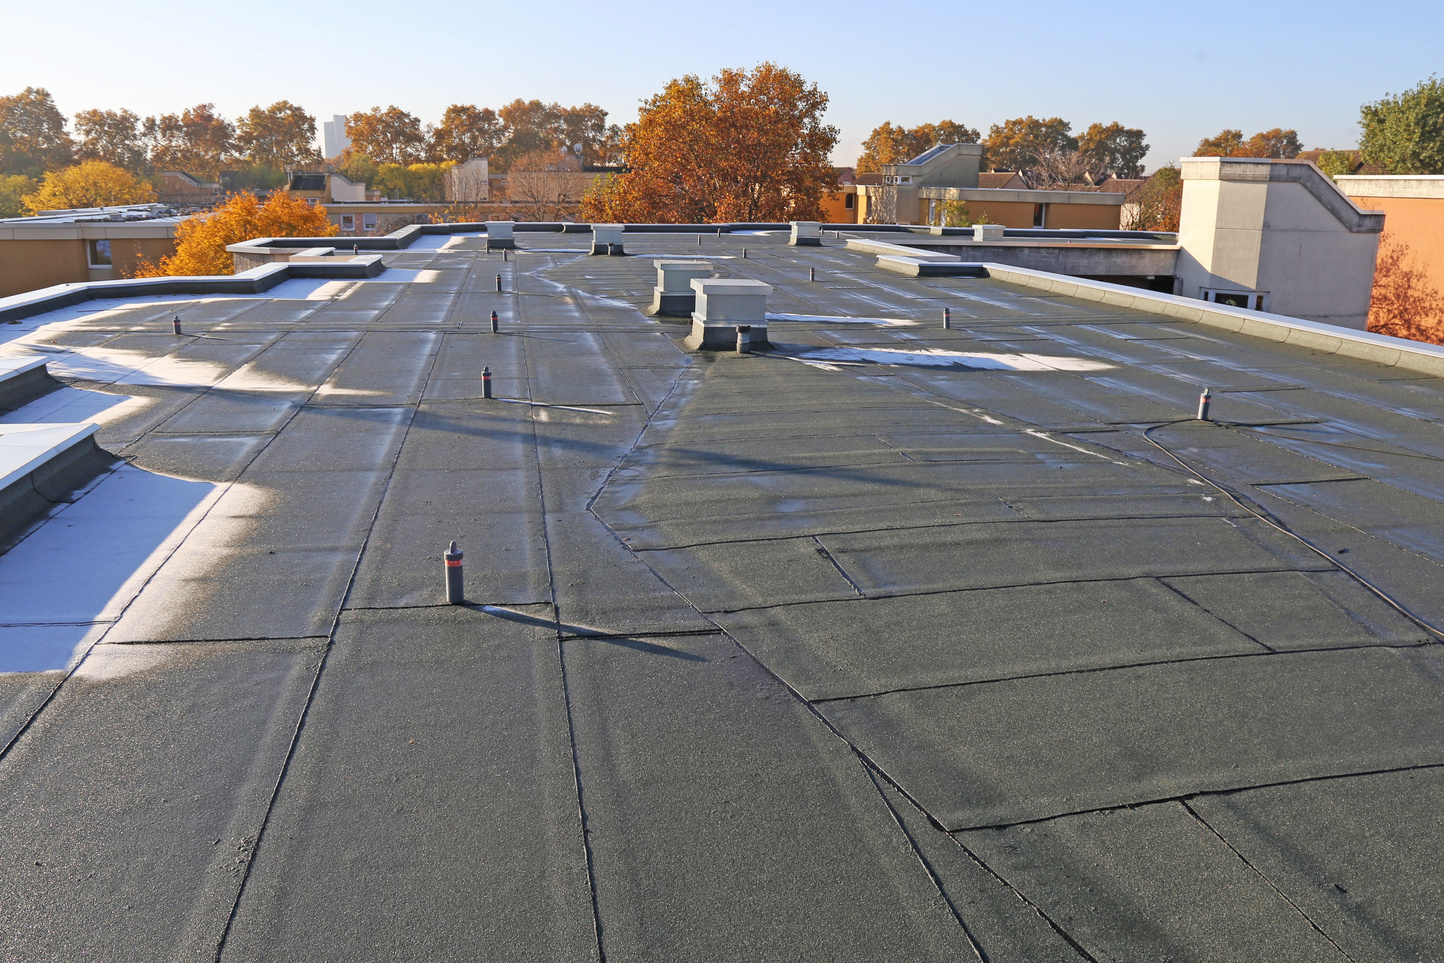 Building with newly renovated flat roof sealing